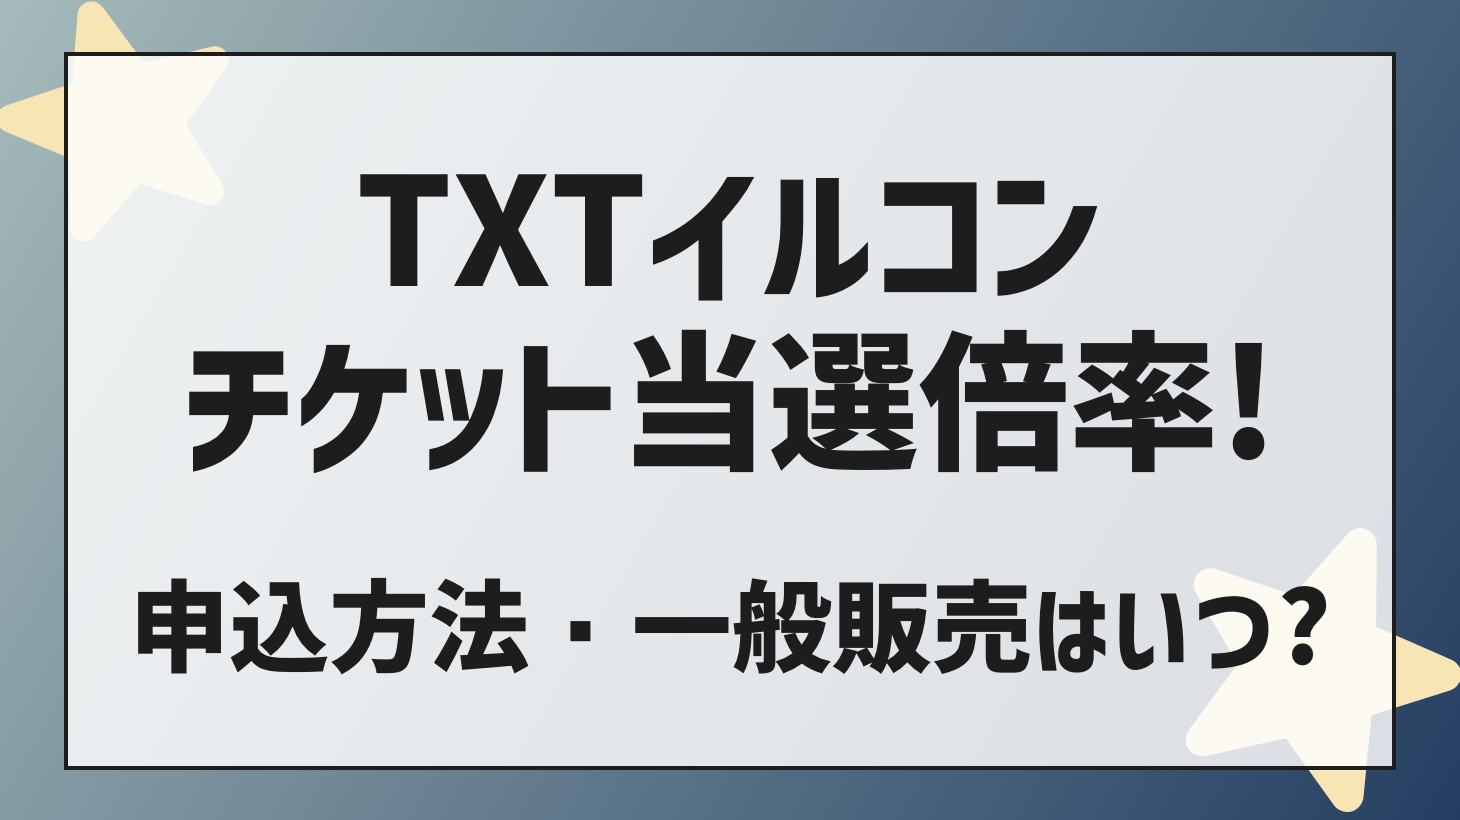 TXT (Tuba) Live 2022 What is the ticket winning rate in Japan? How to apply ・ When is the general sale?